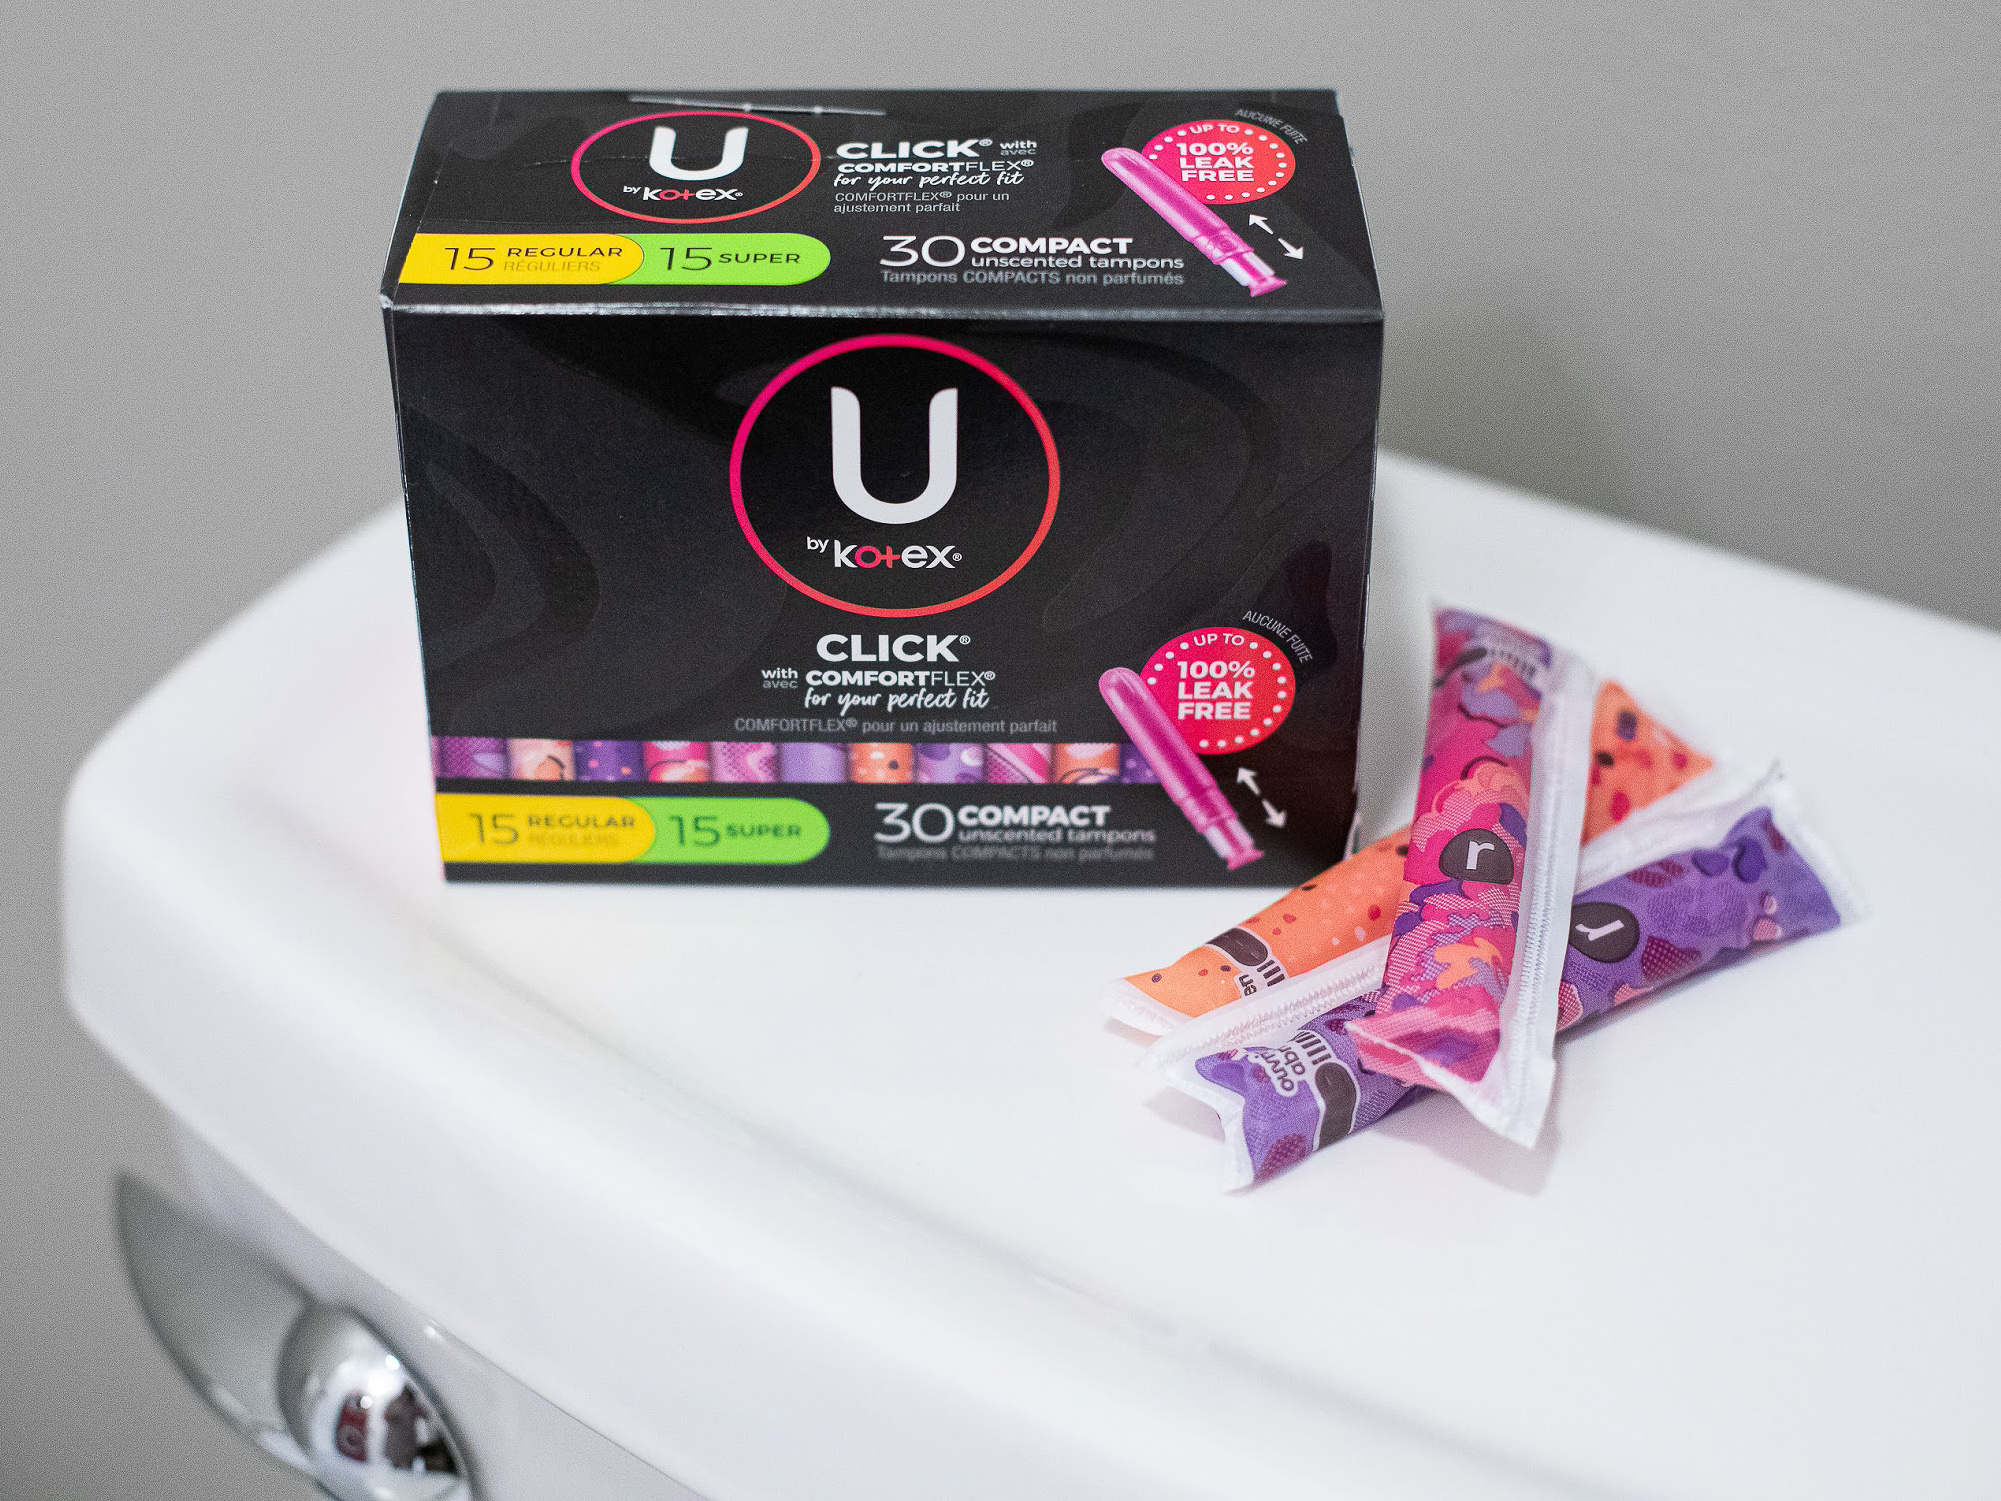 Pick Up Savings On U by Kotex Pads & Liners This Week At Publix on I Heart Publix